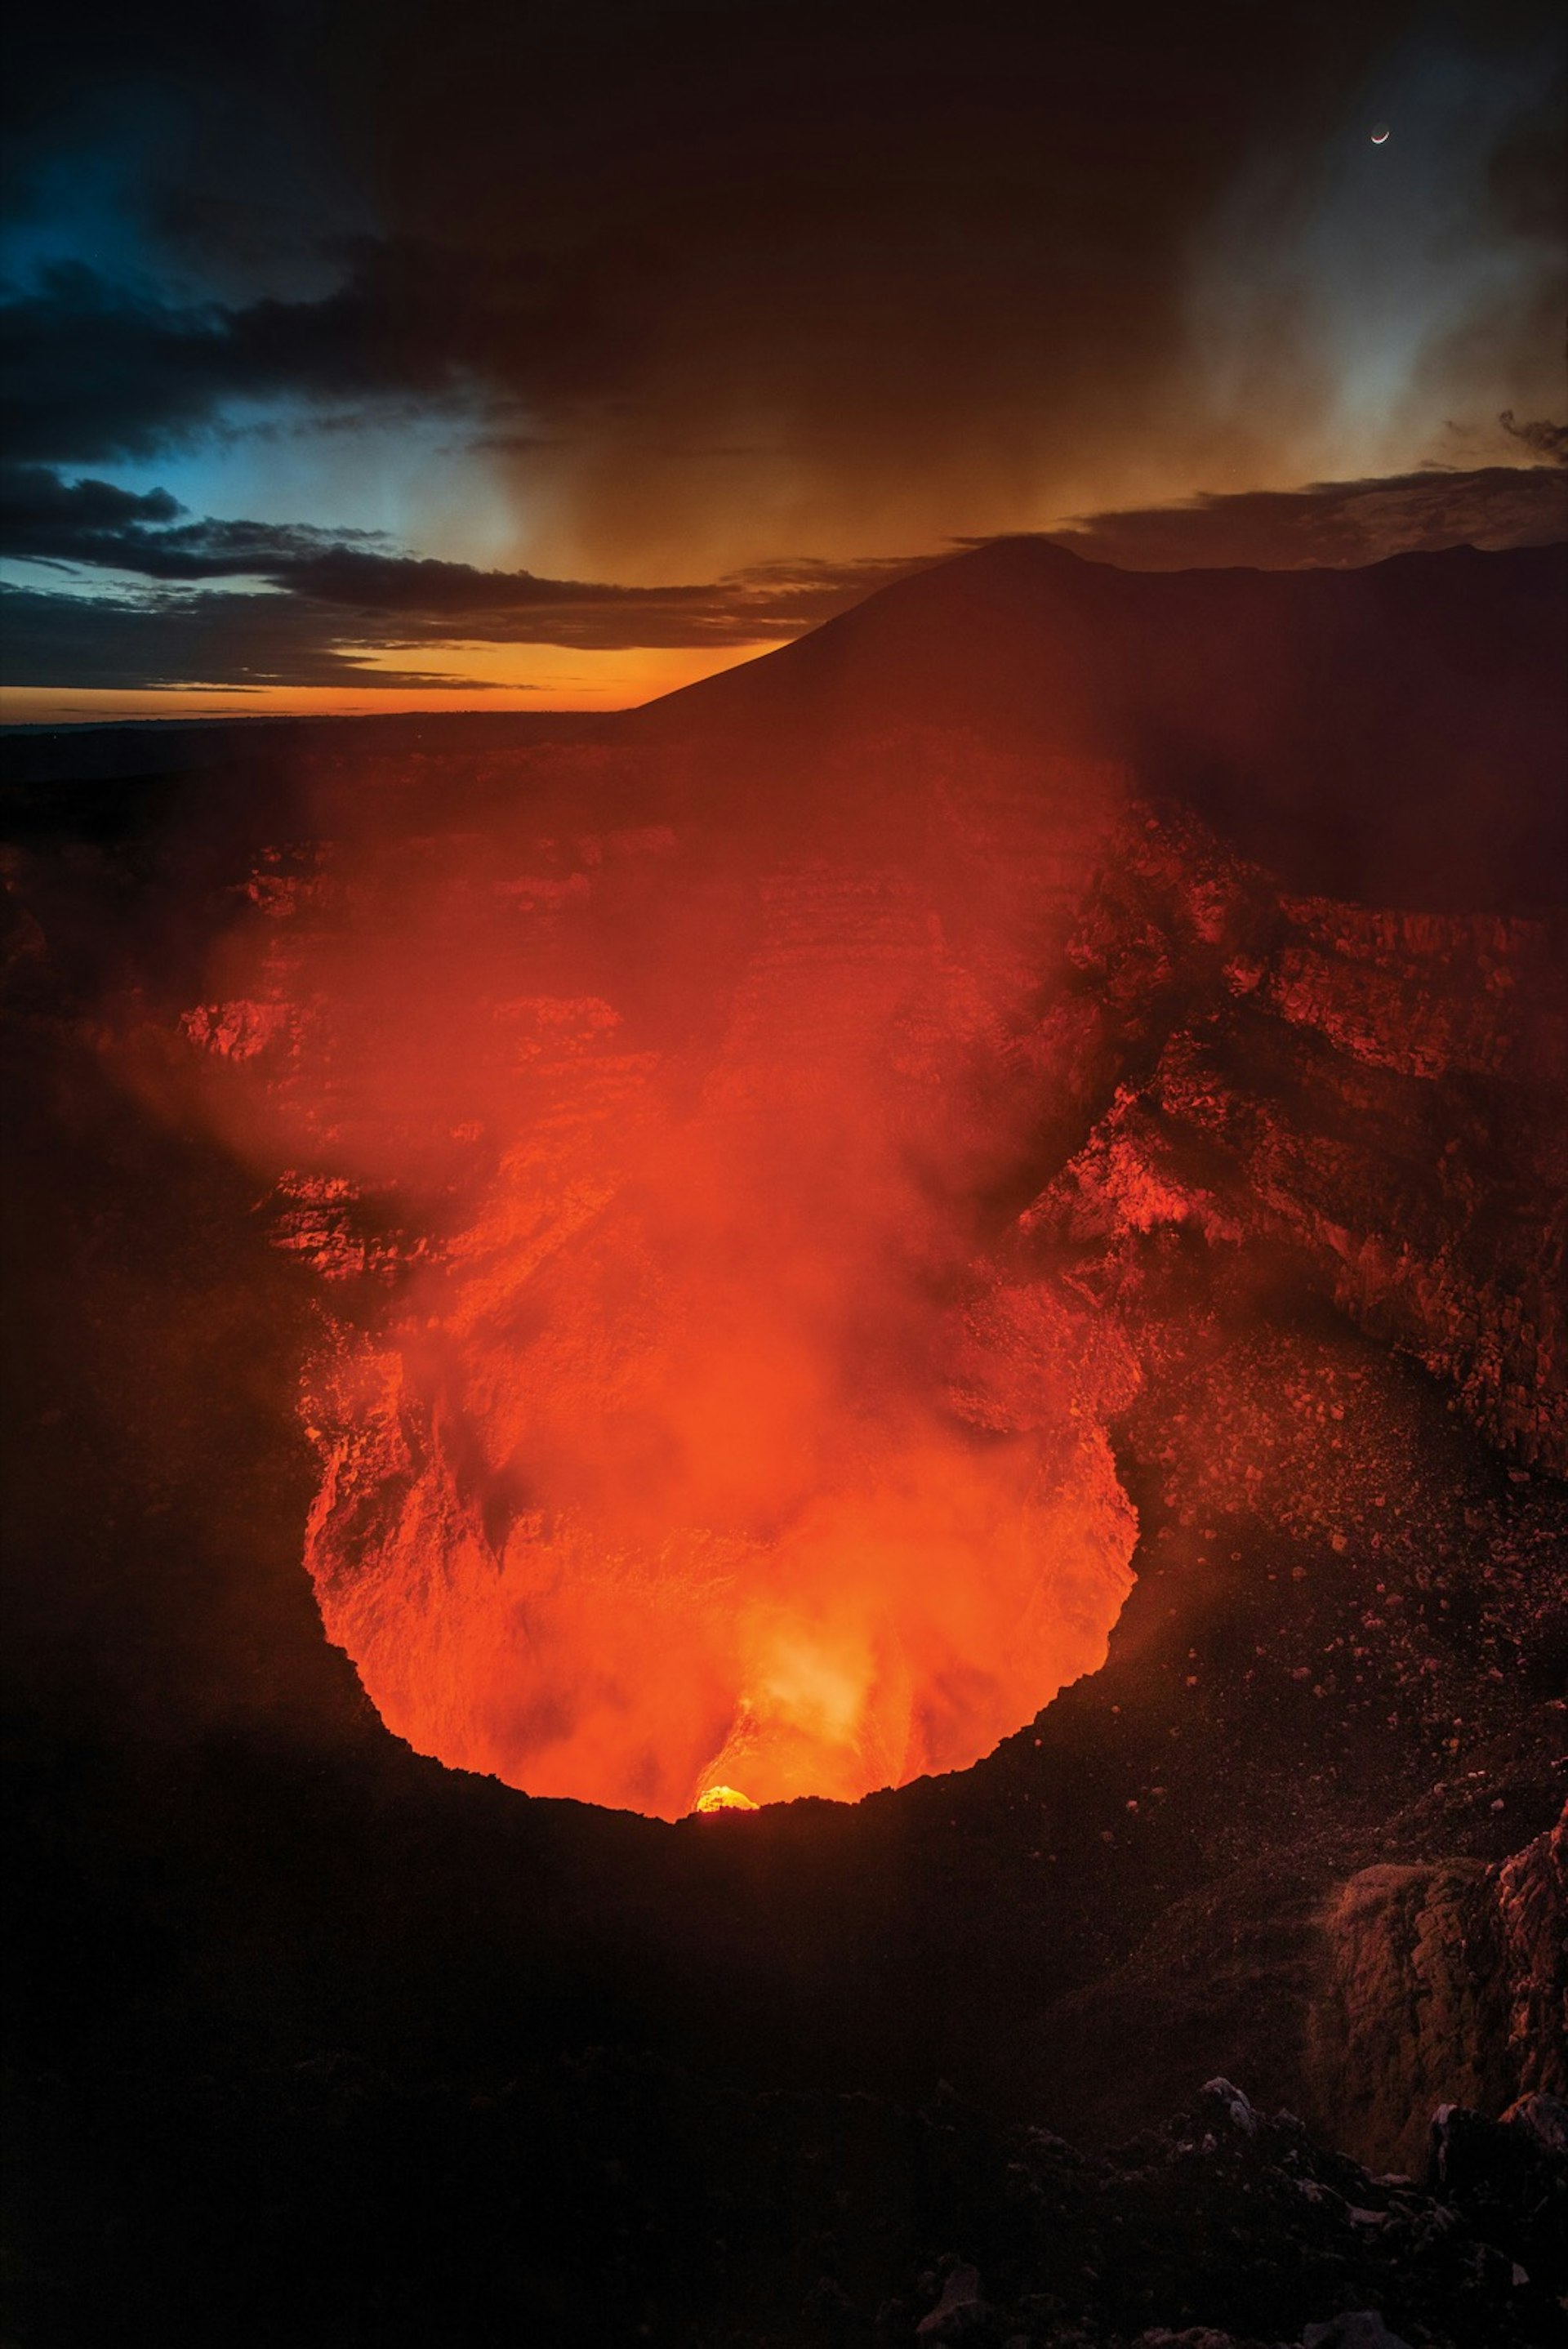 Orange lava spews and white steam rises from the top of Masaya Volcano at night. Nicaragua travel offers chances to explore the country's rich landscape. 